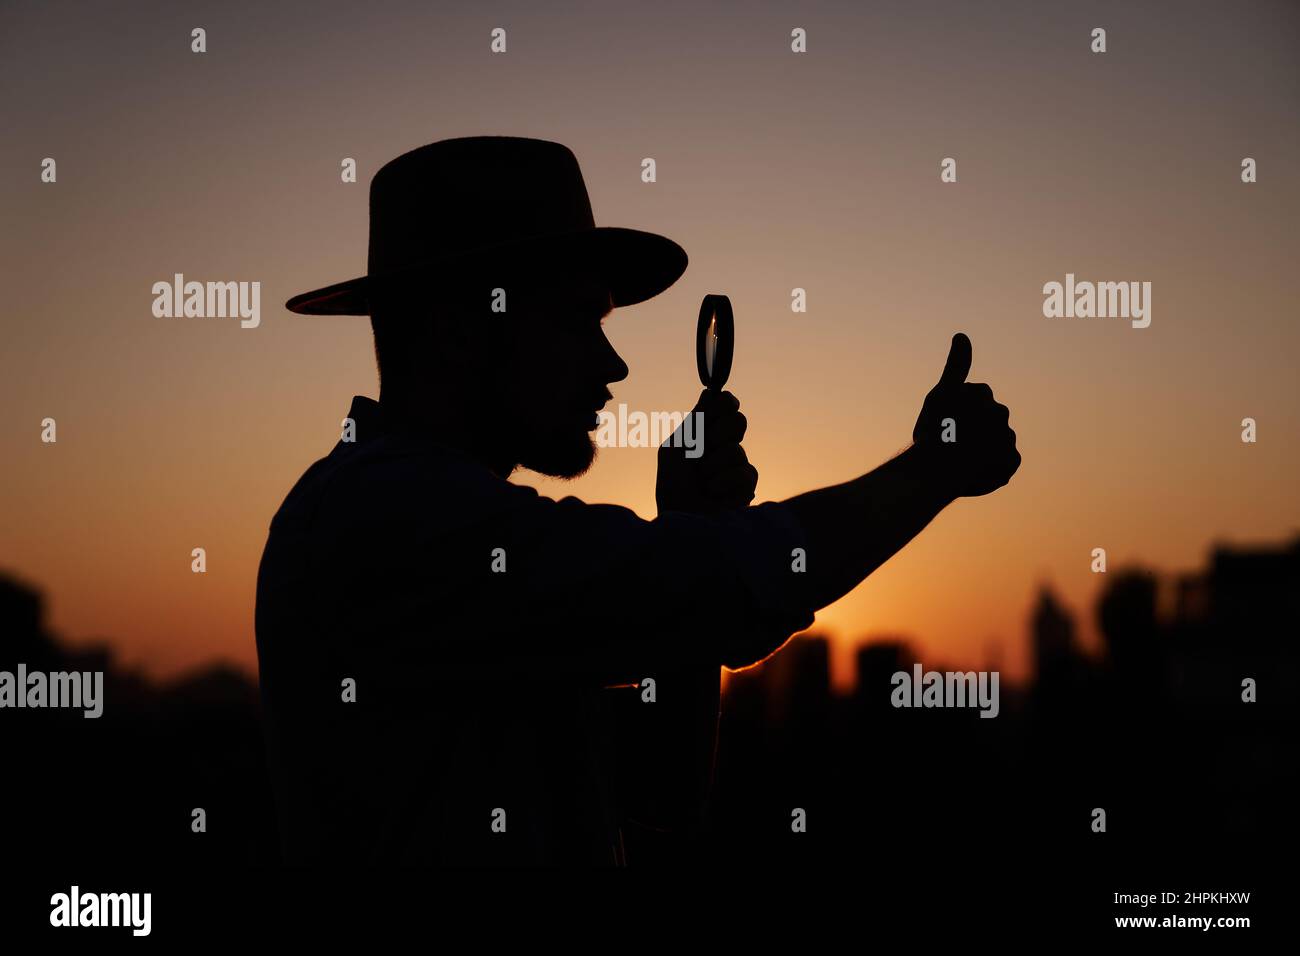 Male silhouette in hat looking with magnifying glass showing thumbs up gesture. Man searching sales or discounts at sunset using loupe with sun on background and urban view. Investigation concept Stock Photo